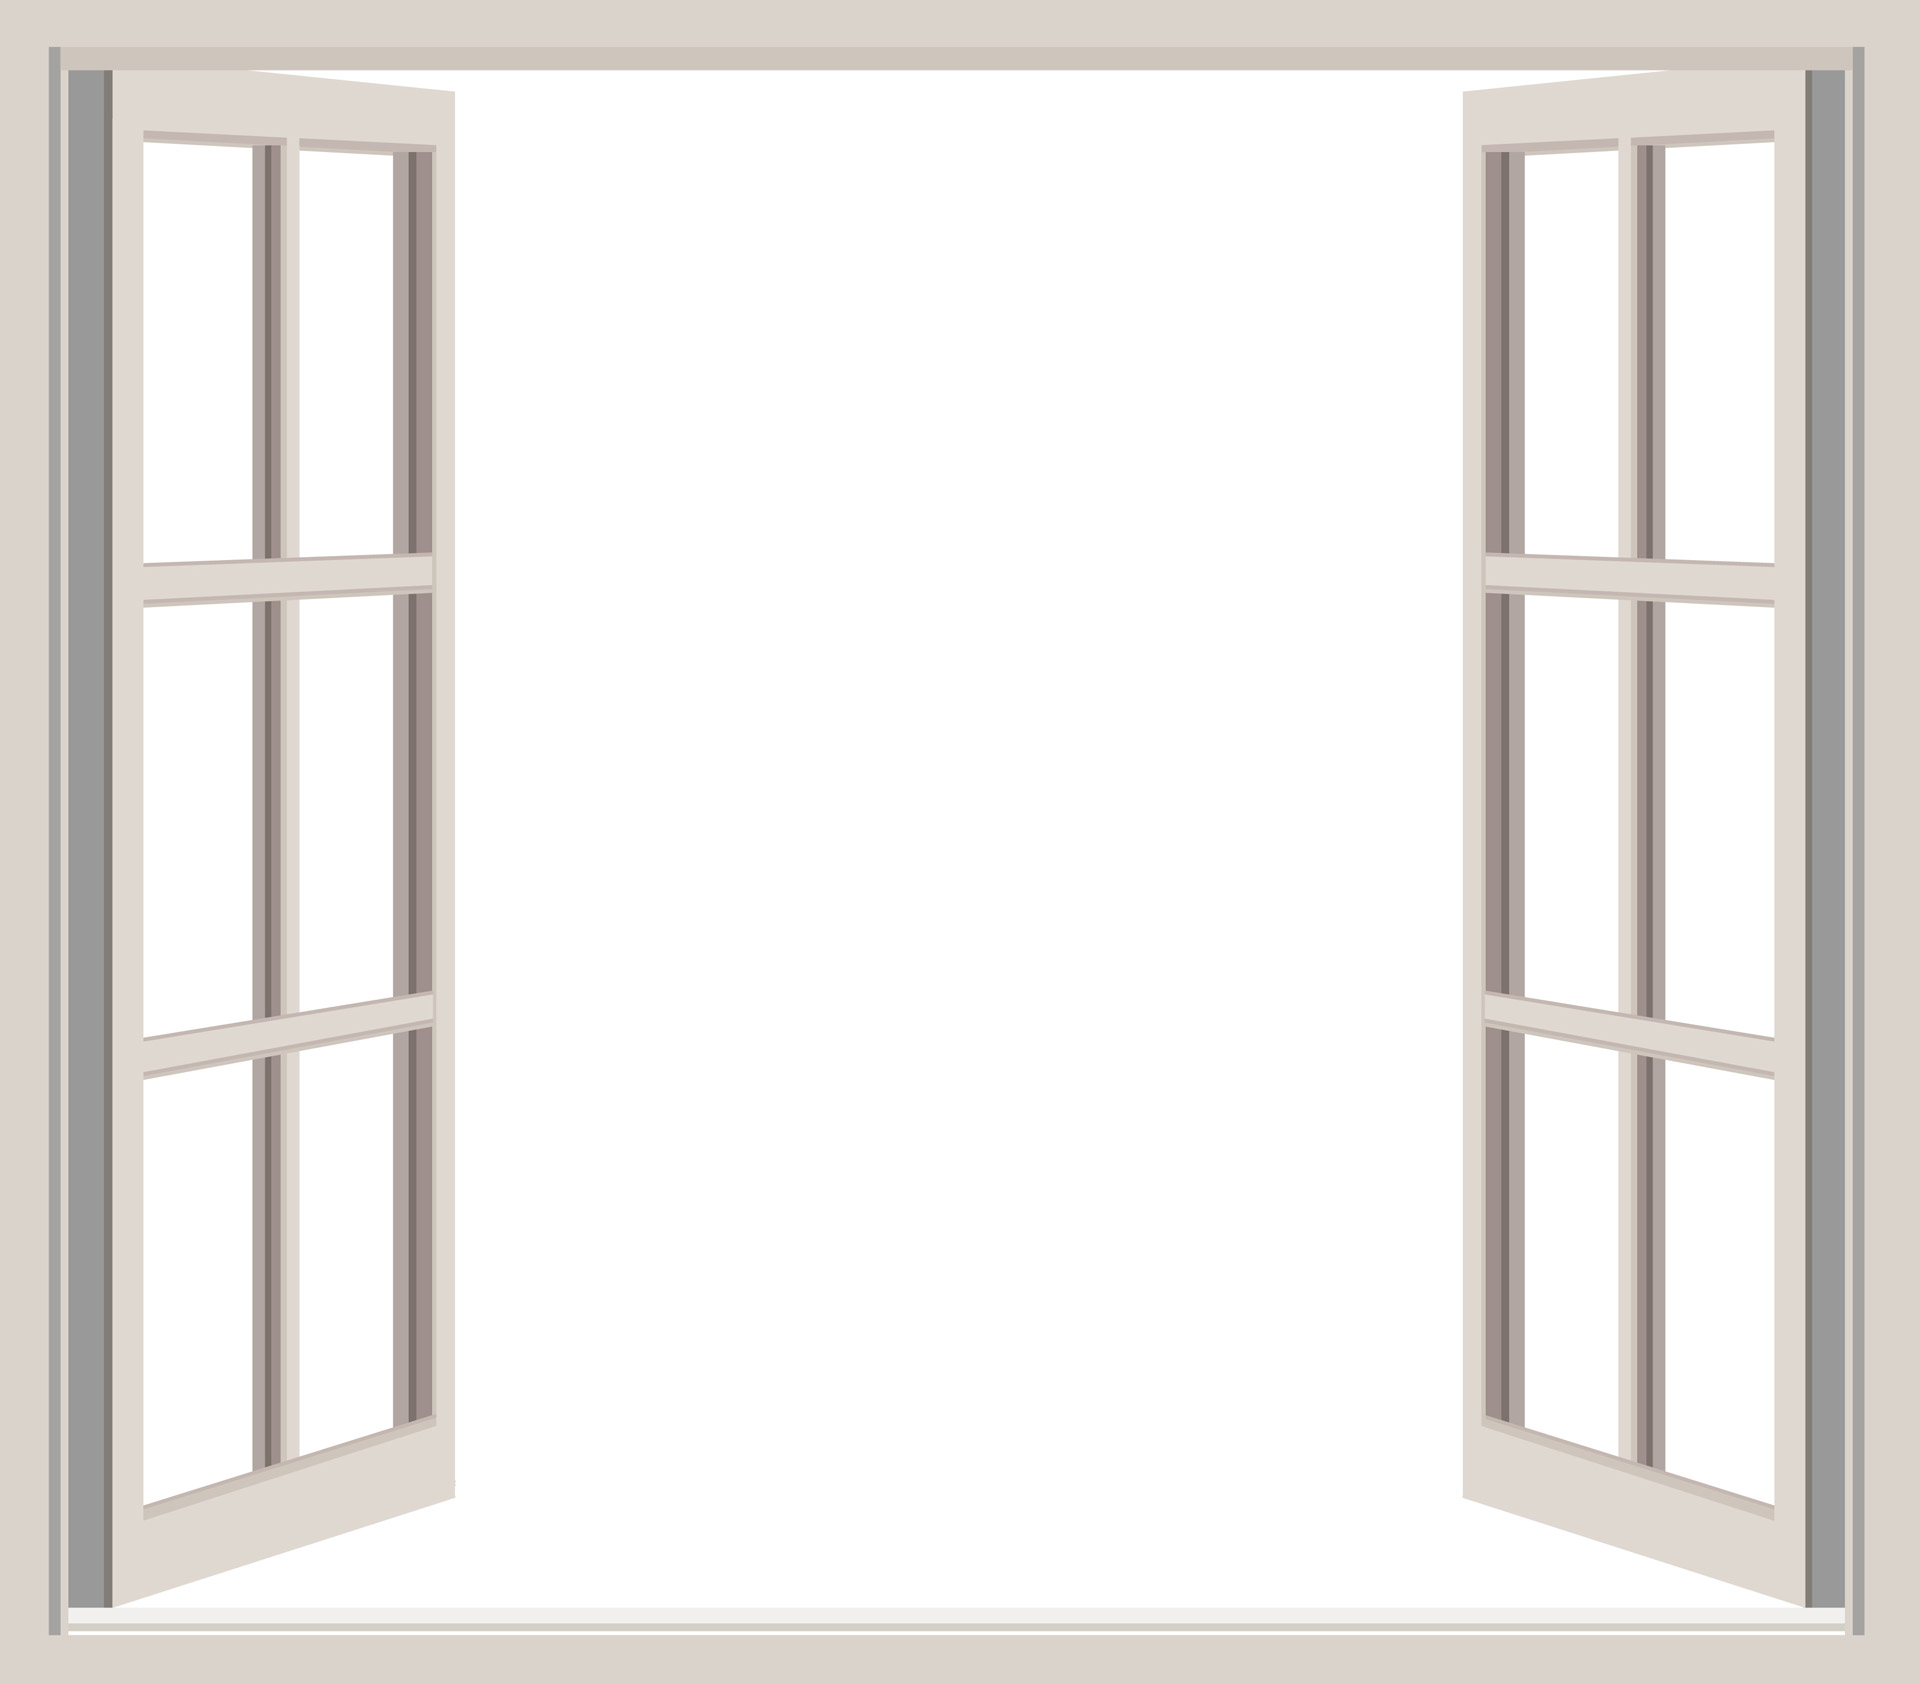 Open Window Frame Clipart Free Stock Photo - Public Domain Pictures